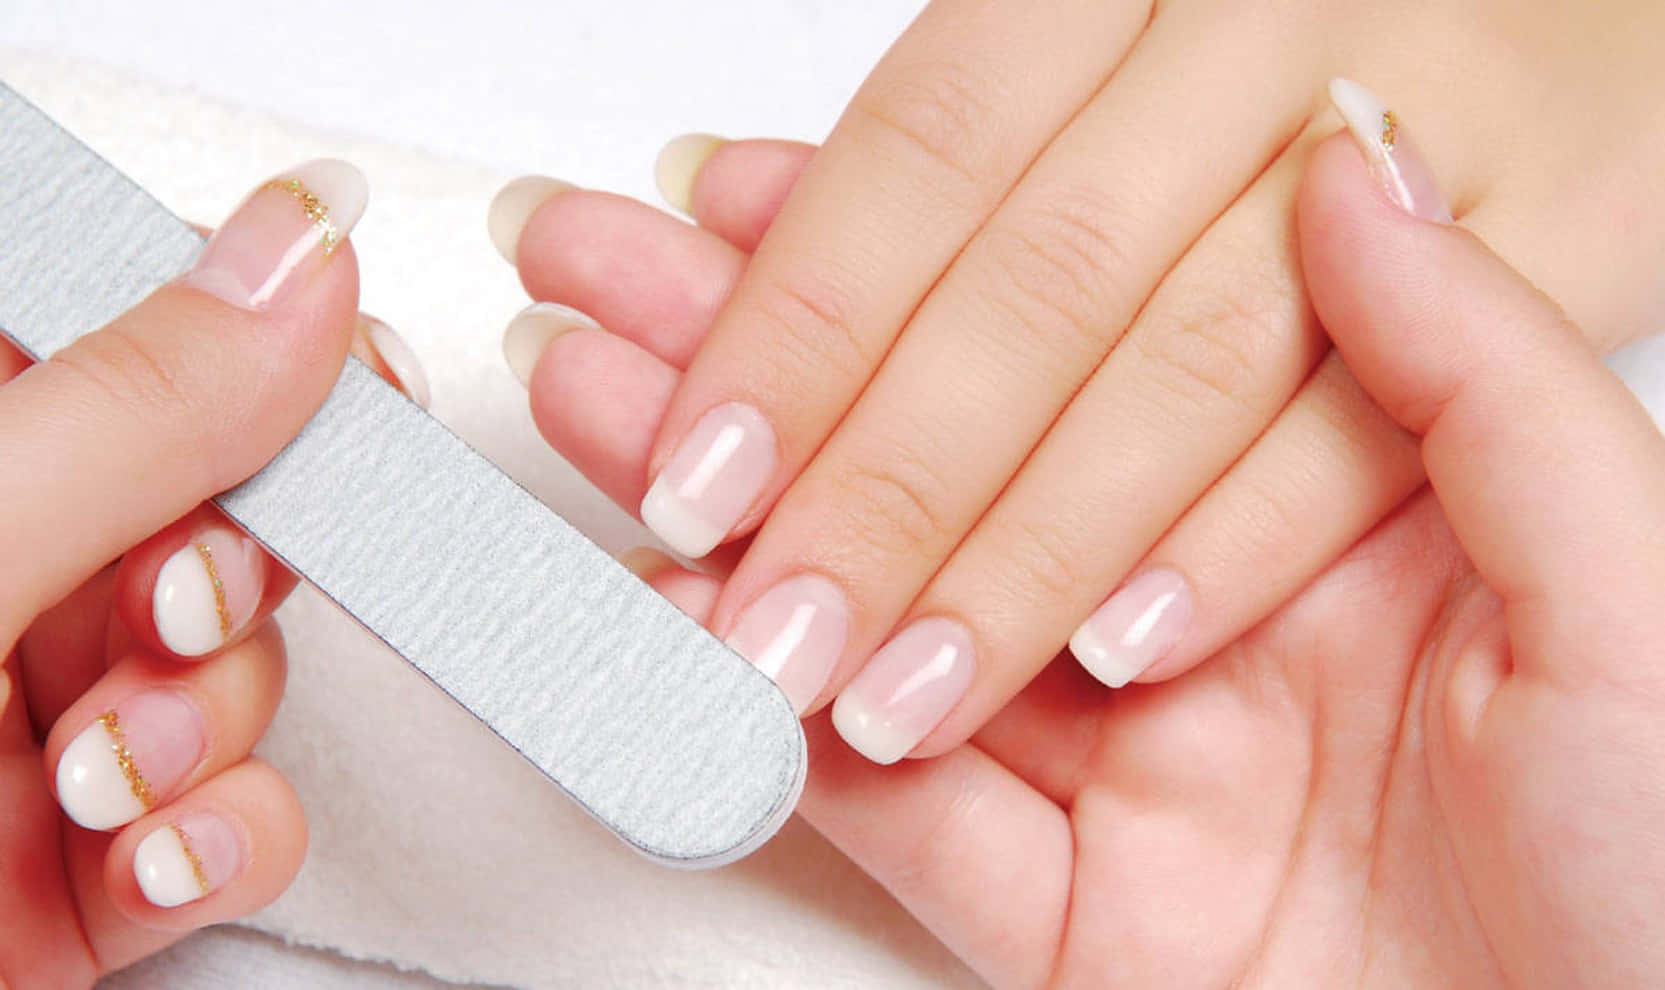 Keep your nails looking healthy and fabulous with a manicure